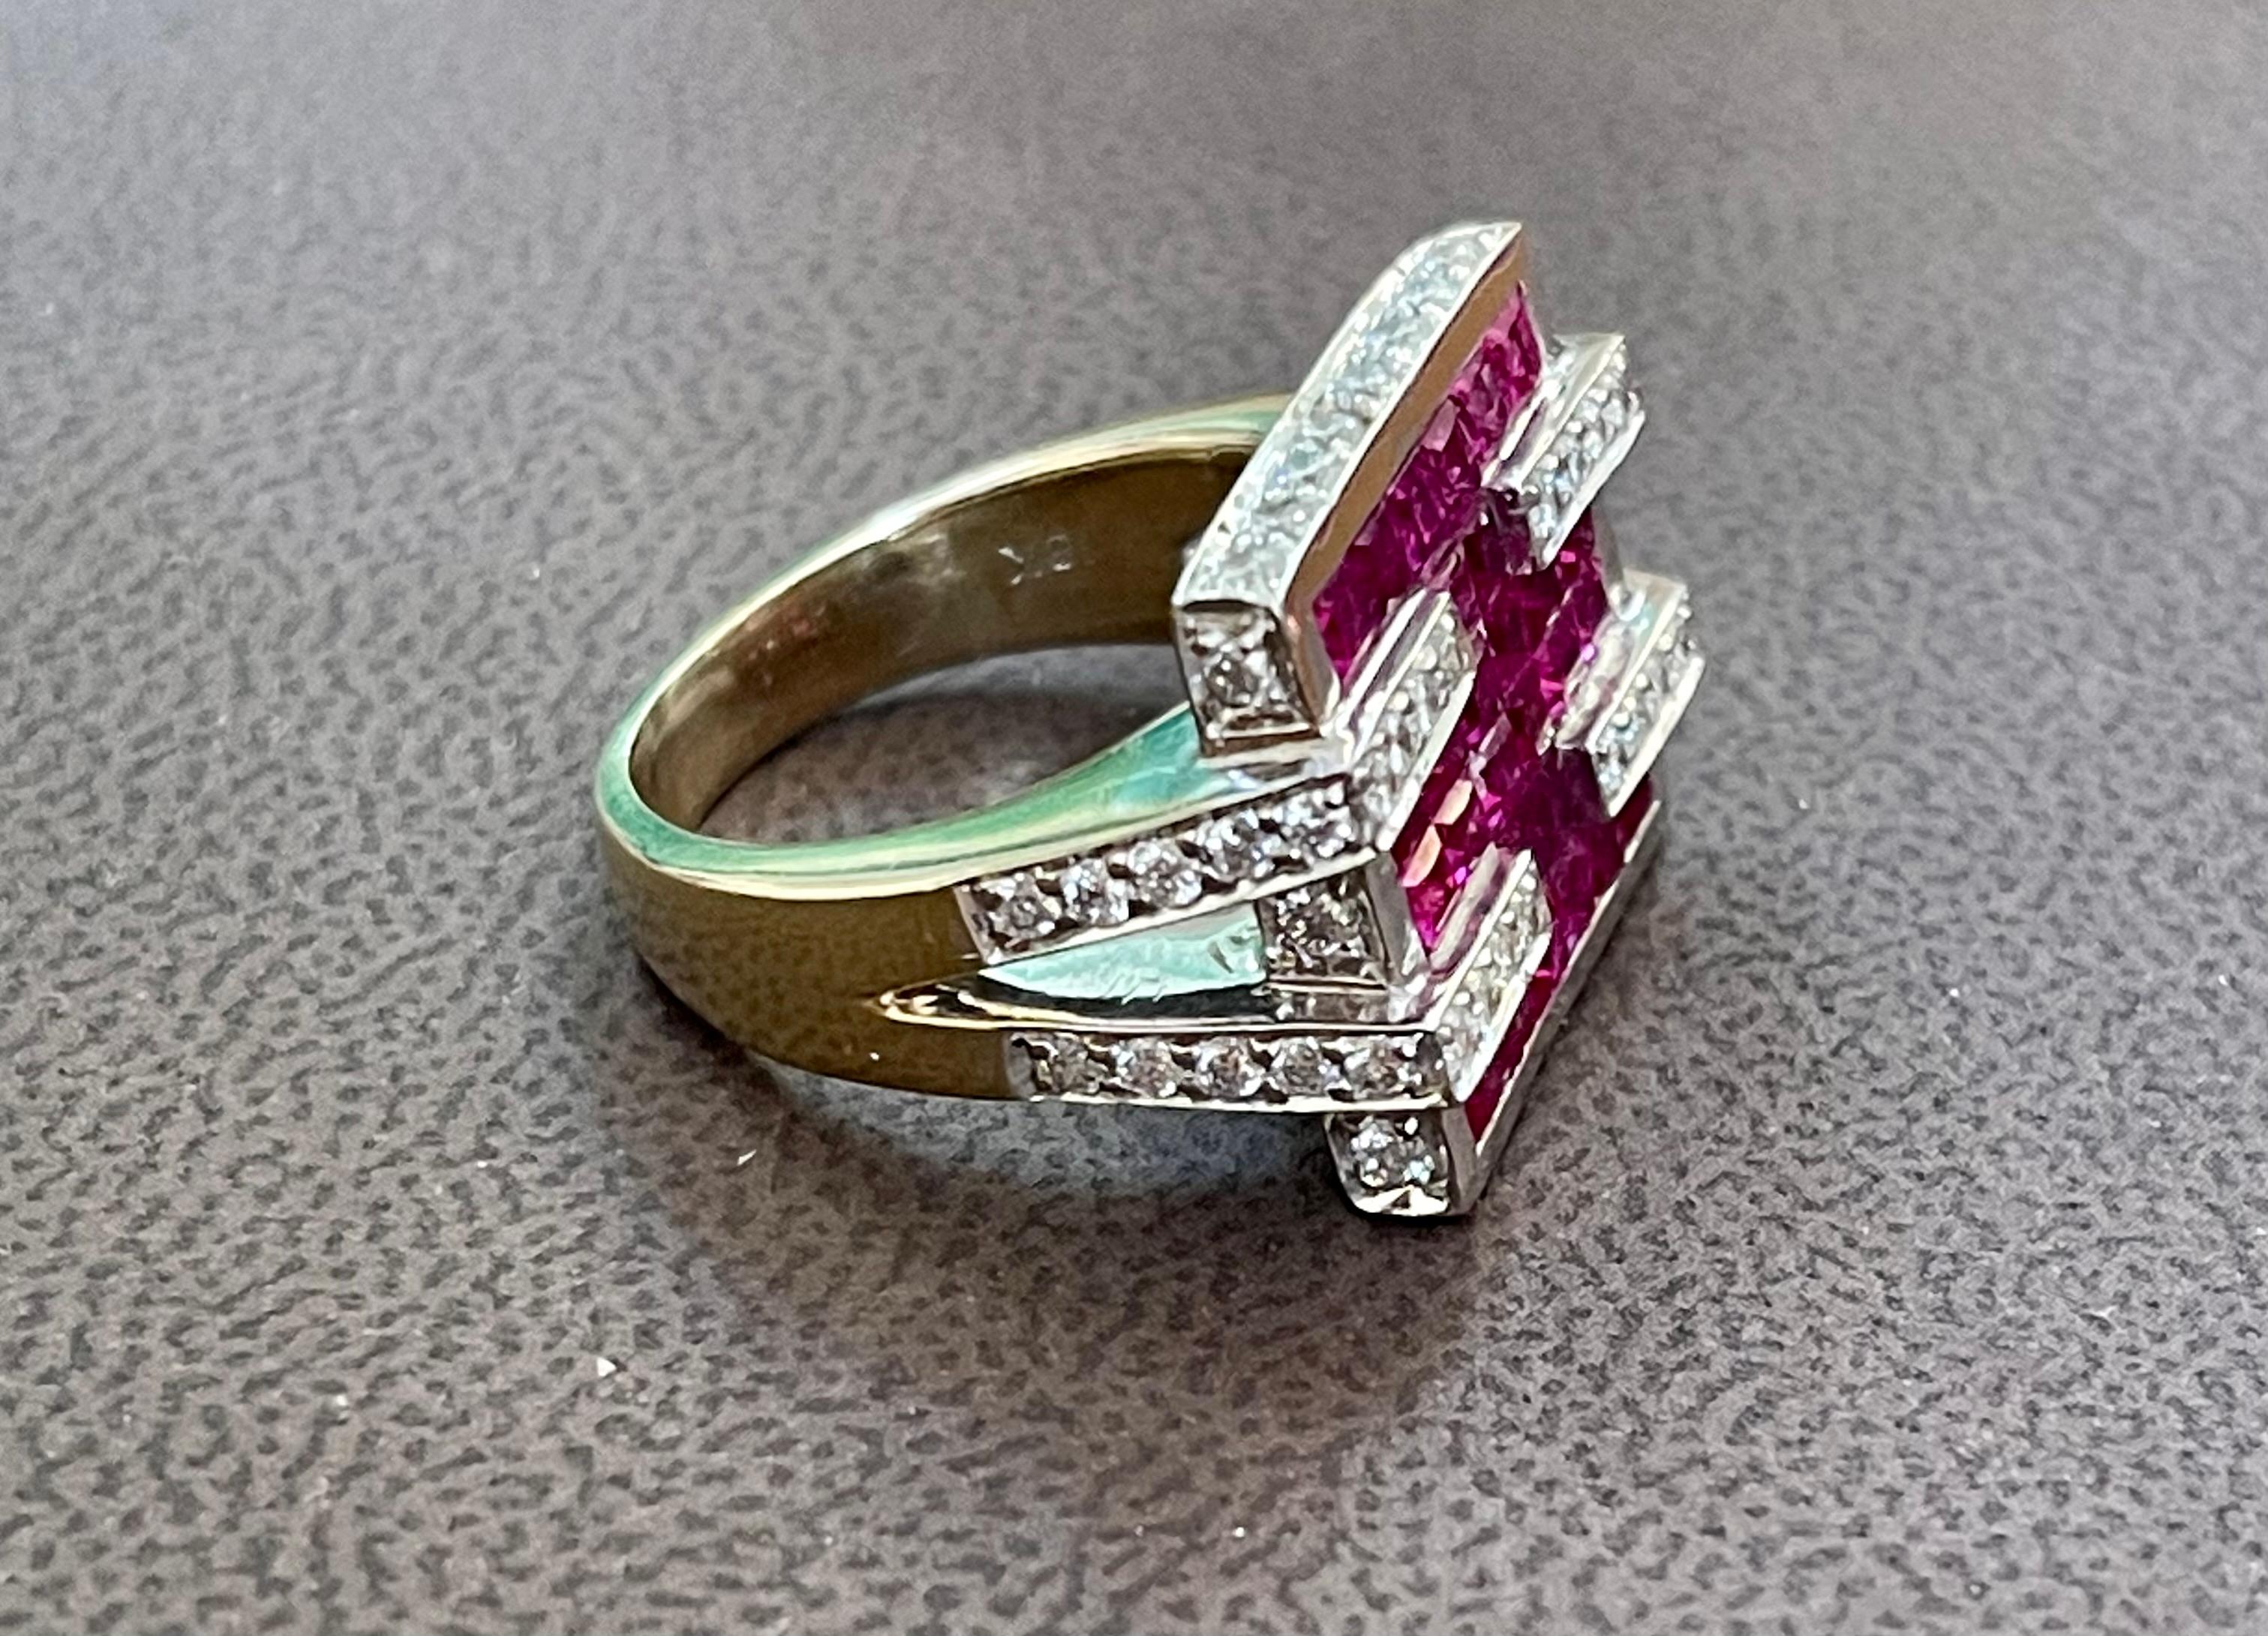 Diamonds & Princess Cut Invisible Set Rubies Men's Ring 18 Karat 2Tone Gold Ring In Excellent Condition For Sale In New York, NY